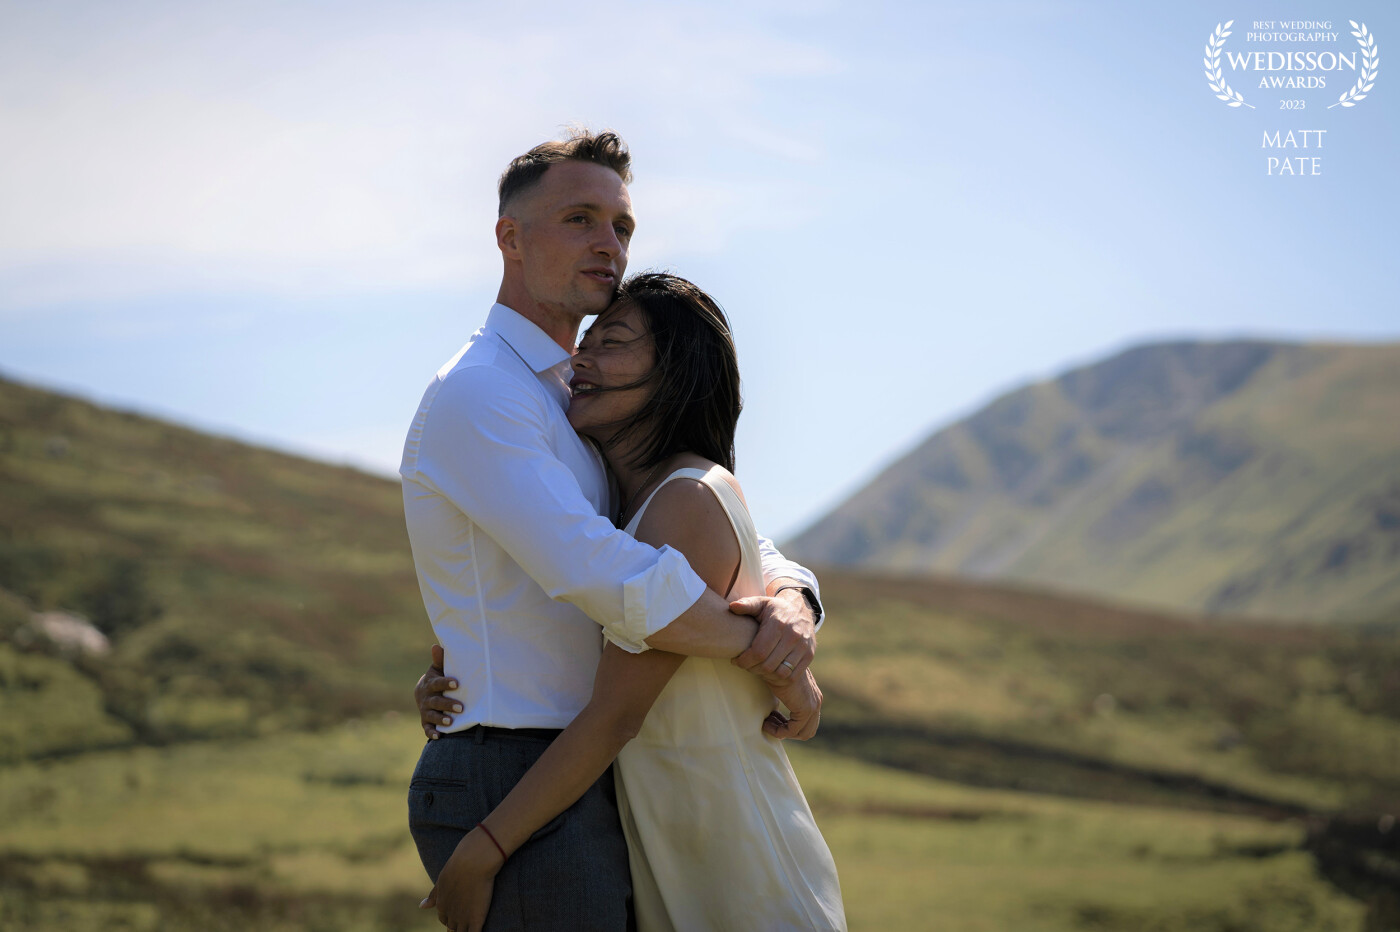 A surprise wedding in the mountains. Jing had no idea her trip to the UK to see friends and family, would include a remote mountain wedding. It was an absolutely amazing experience to be a part of this celebration!